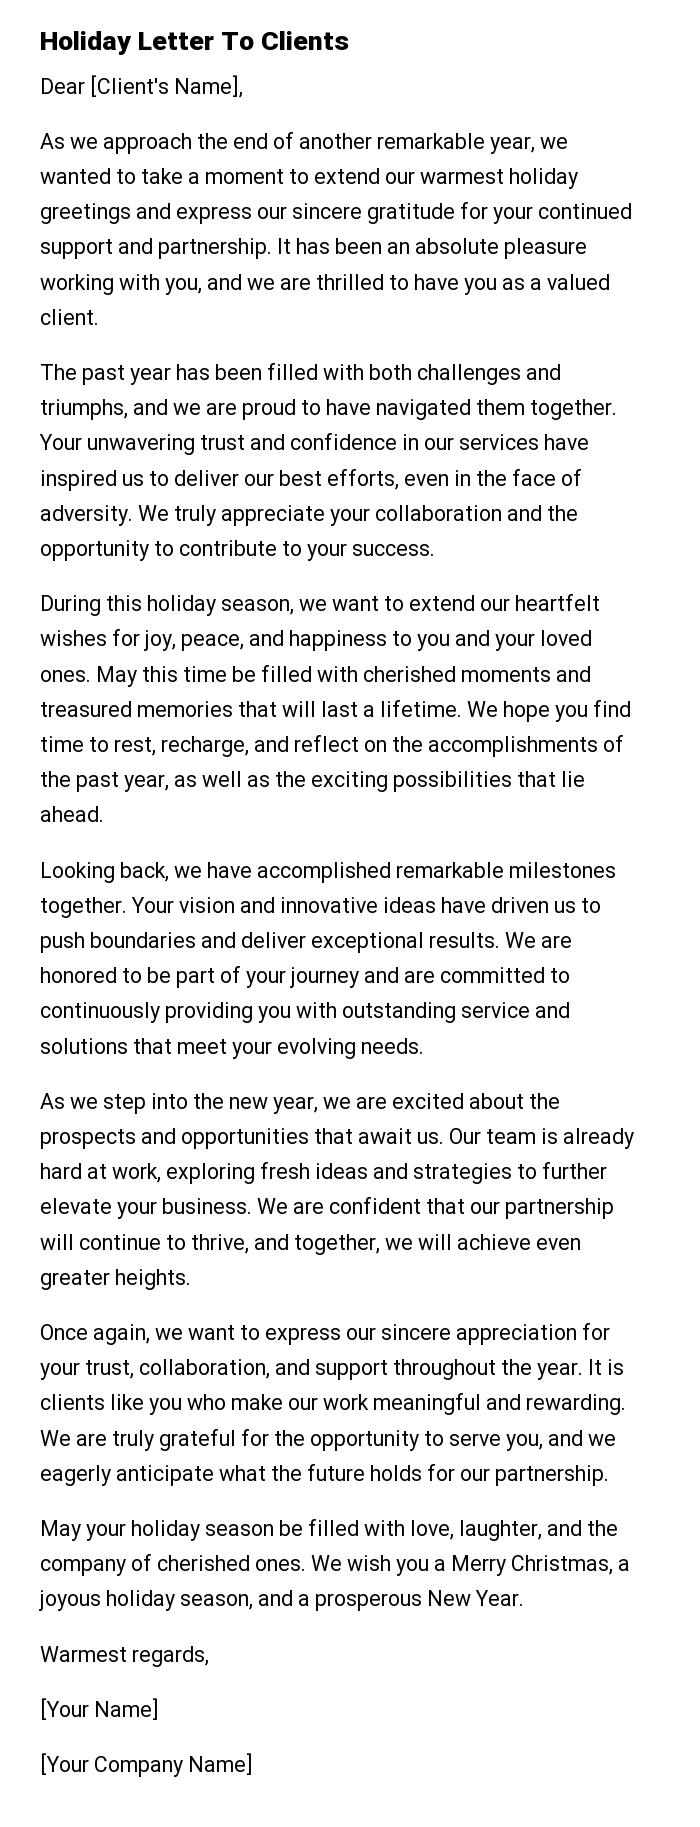 Holiday Letter To Clients